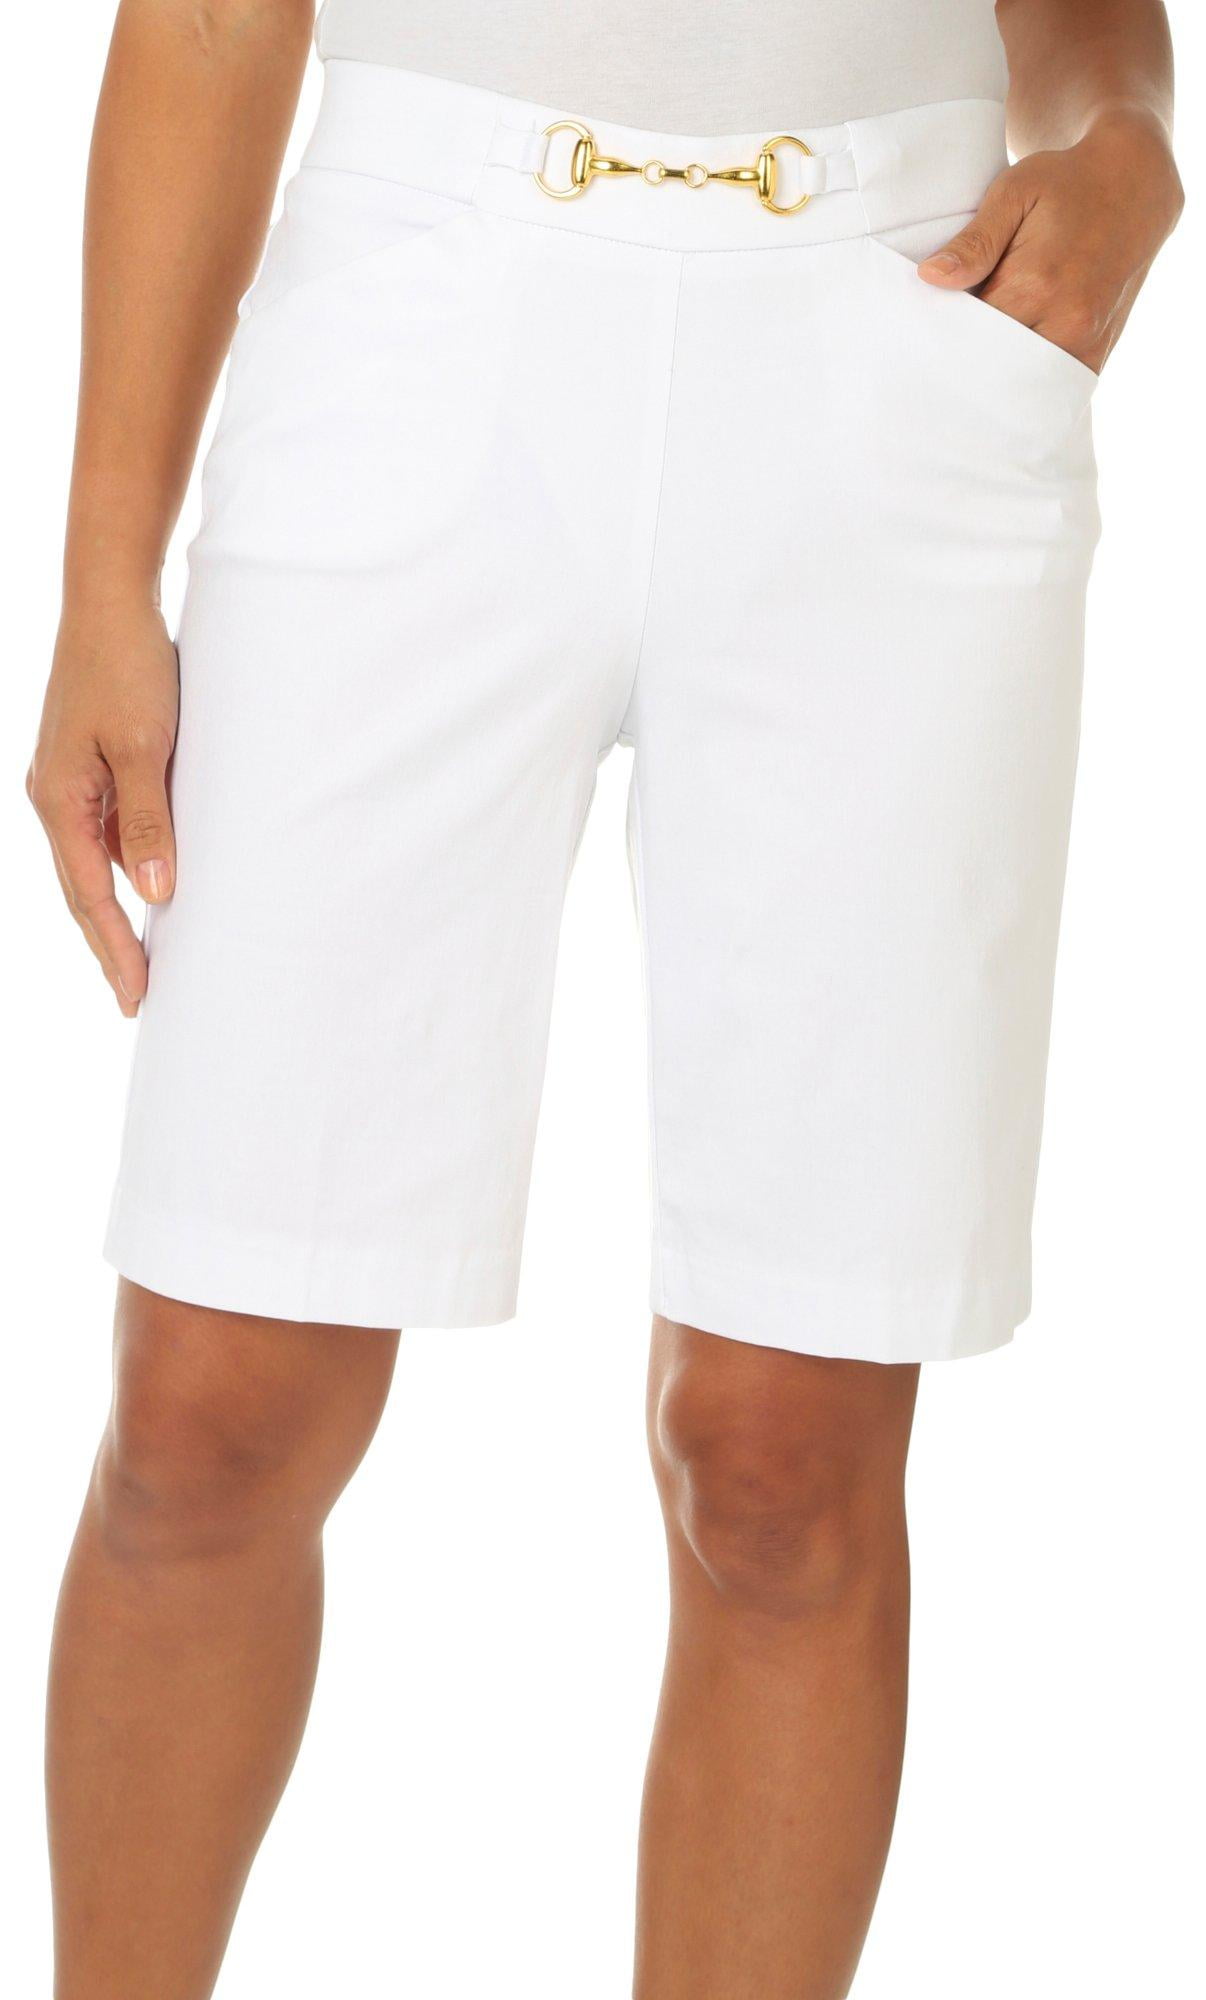 Counterparts Petite Solid Stretch Pull-On Skimmer Shorts 4P White ...